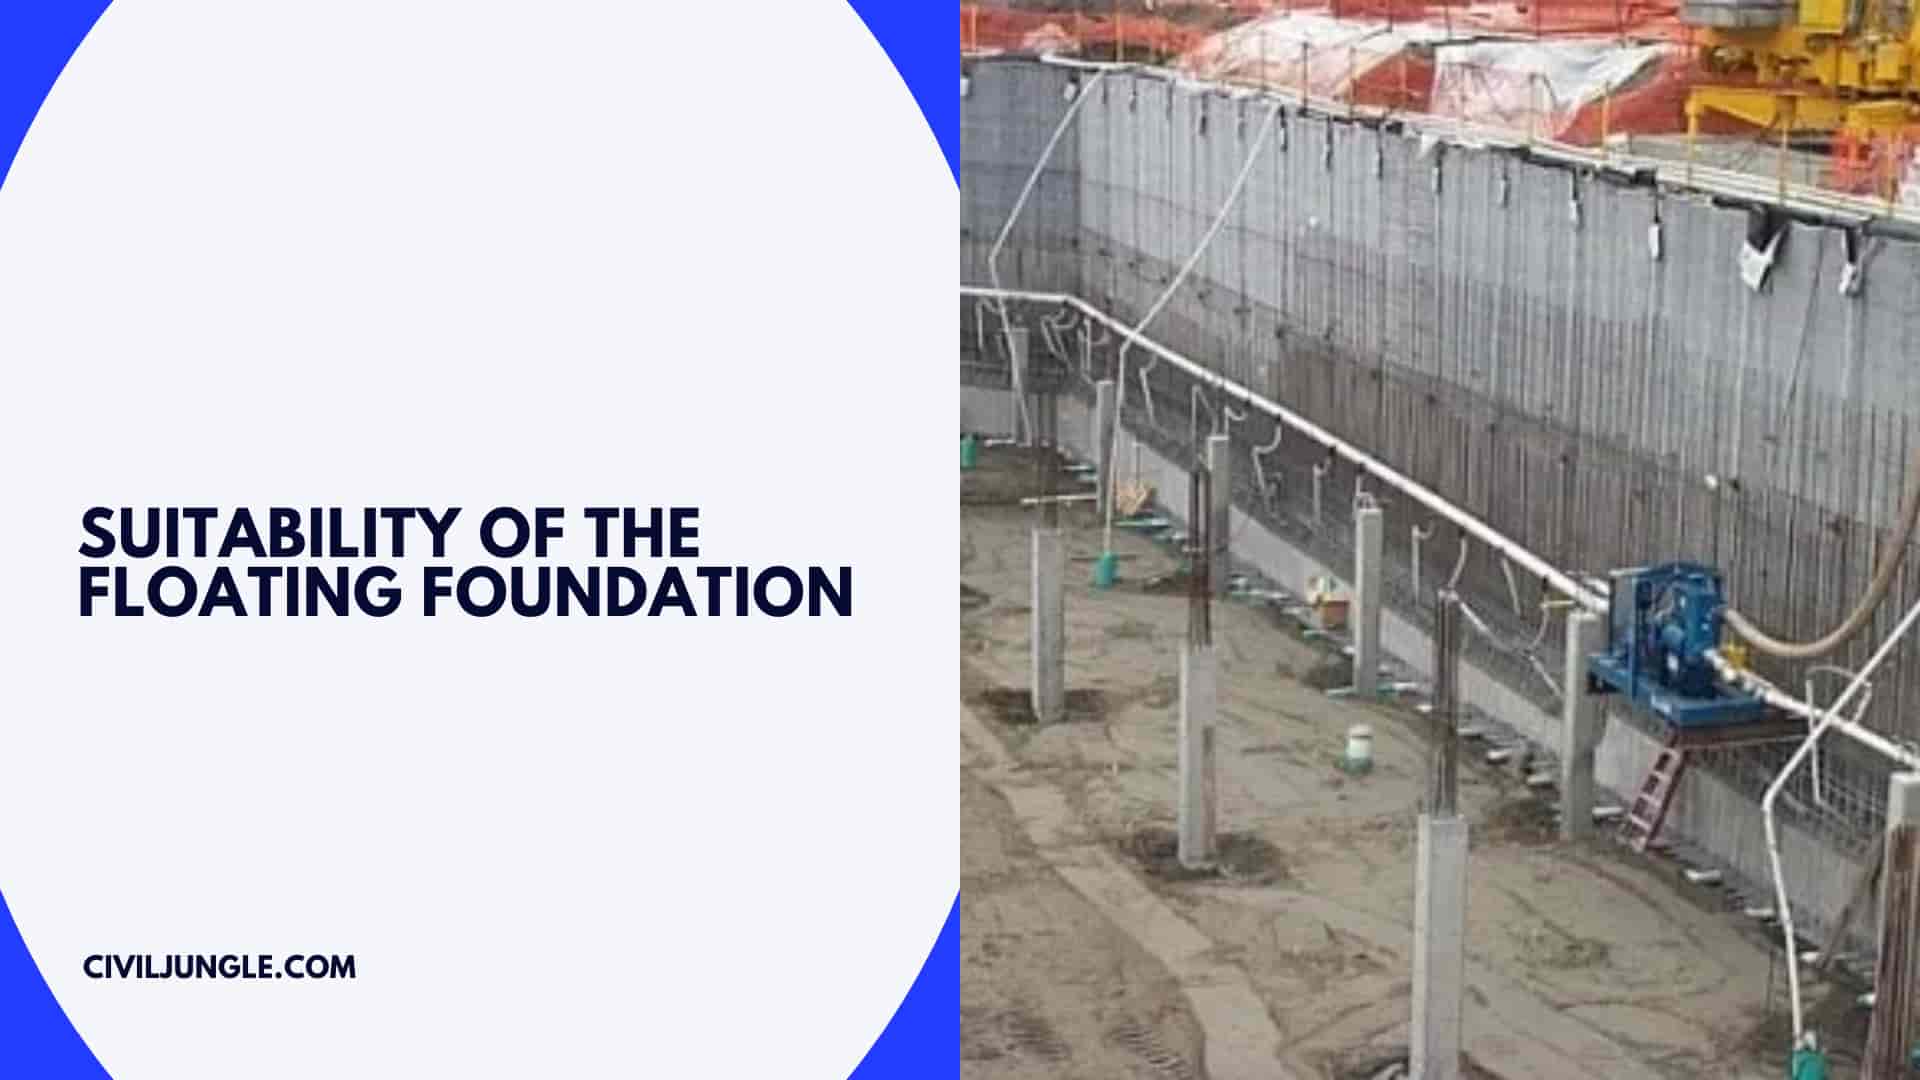 Suitability of the Floating Foundation